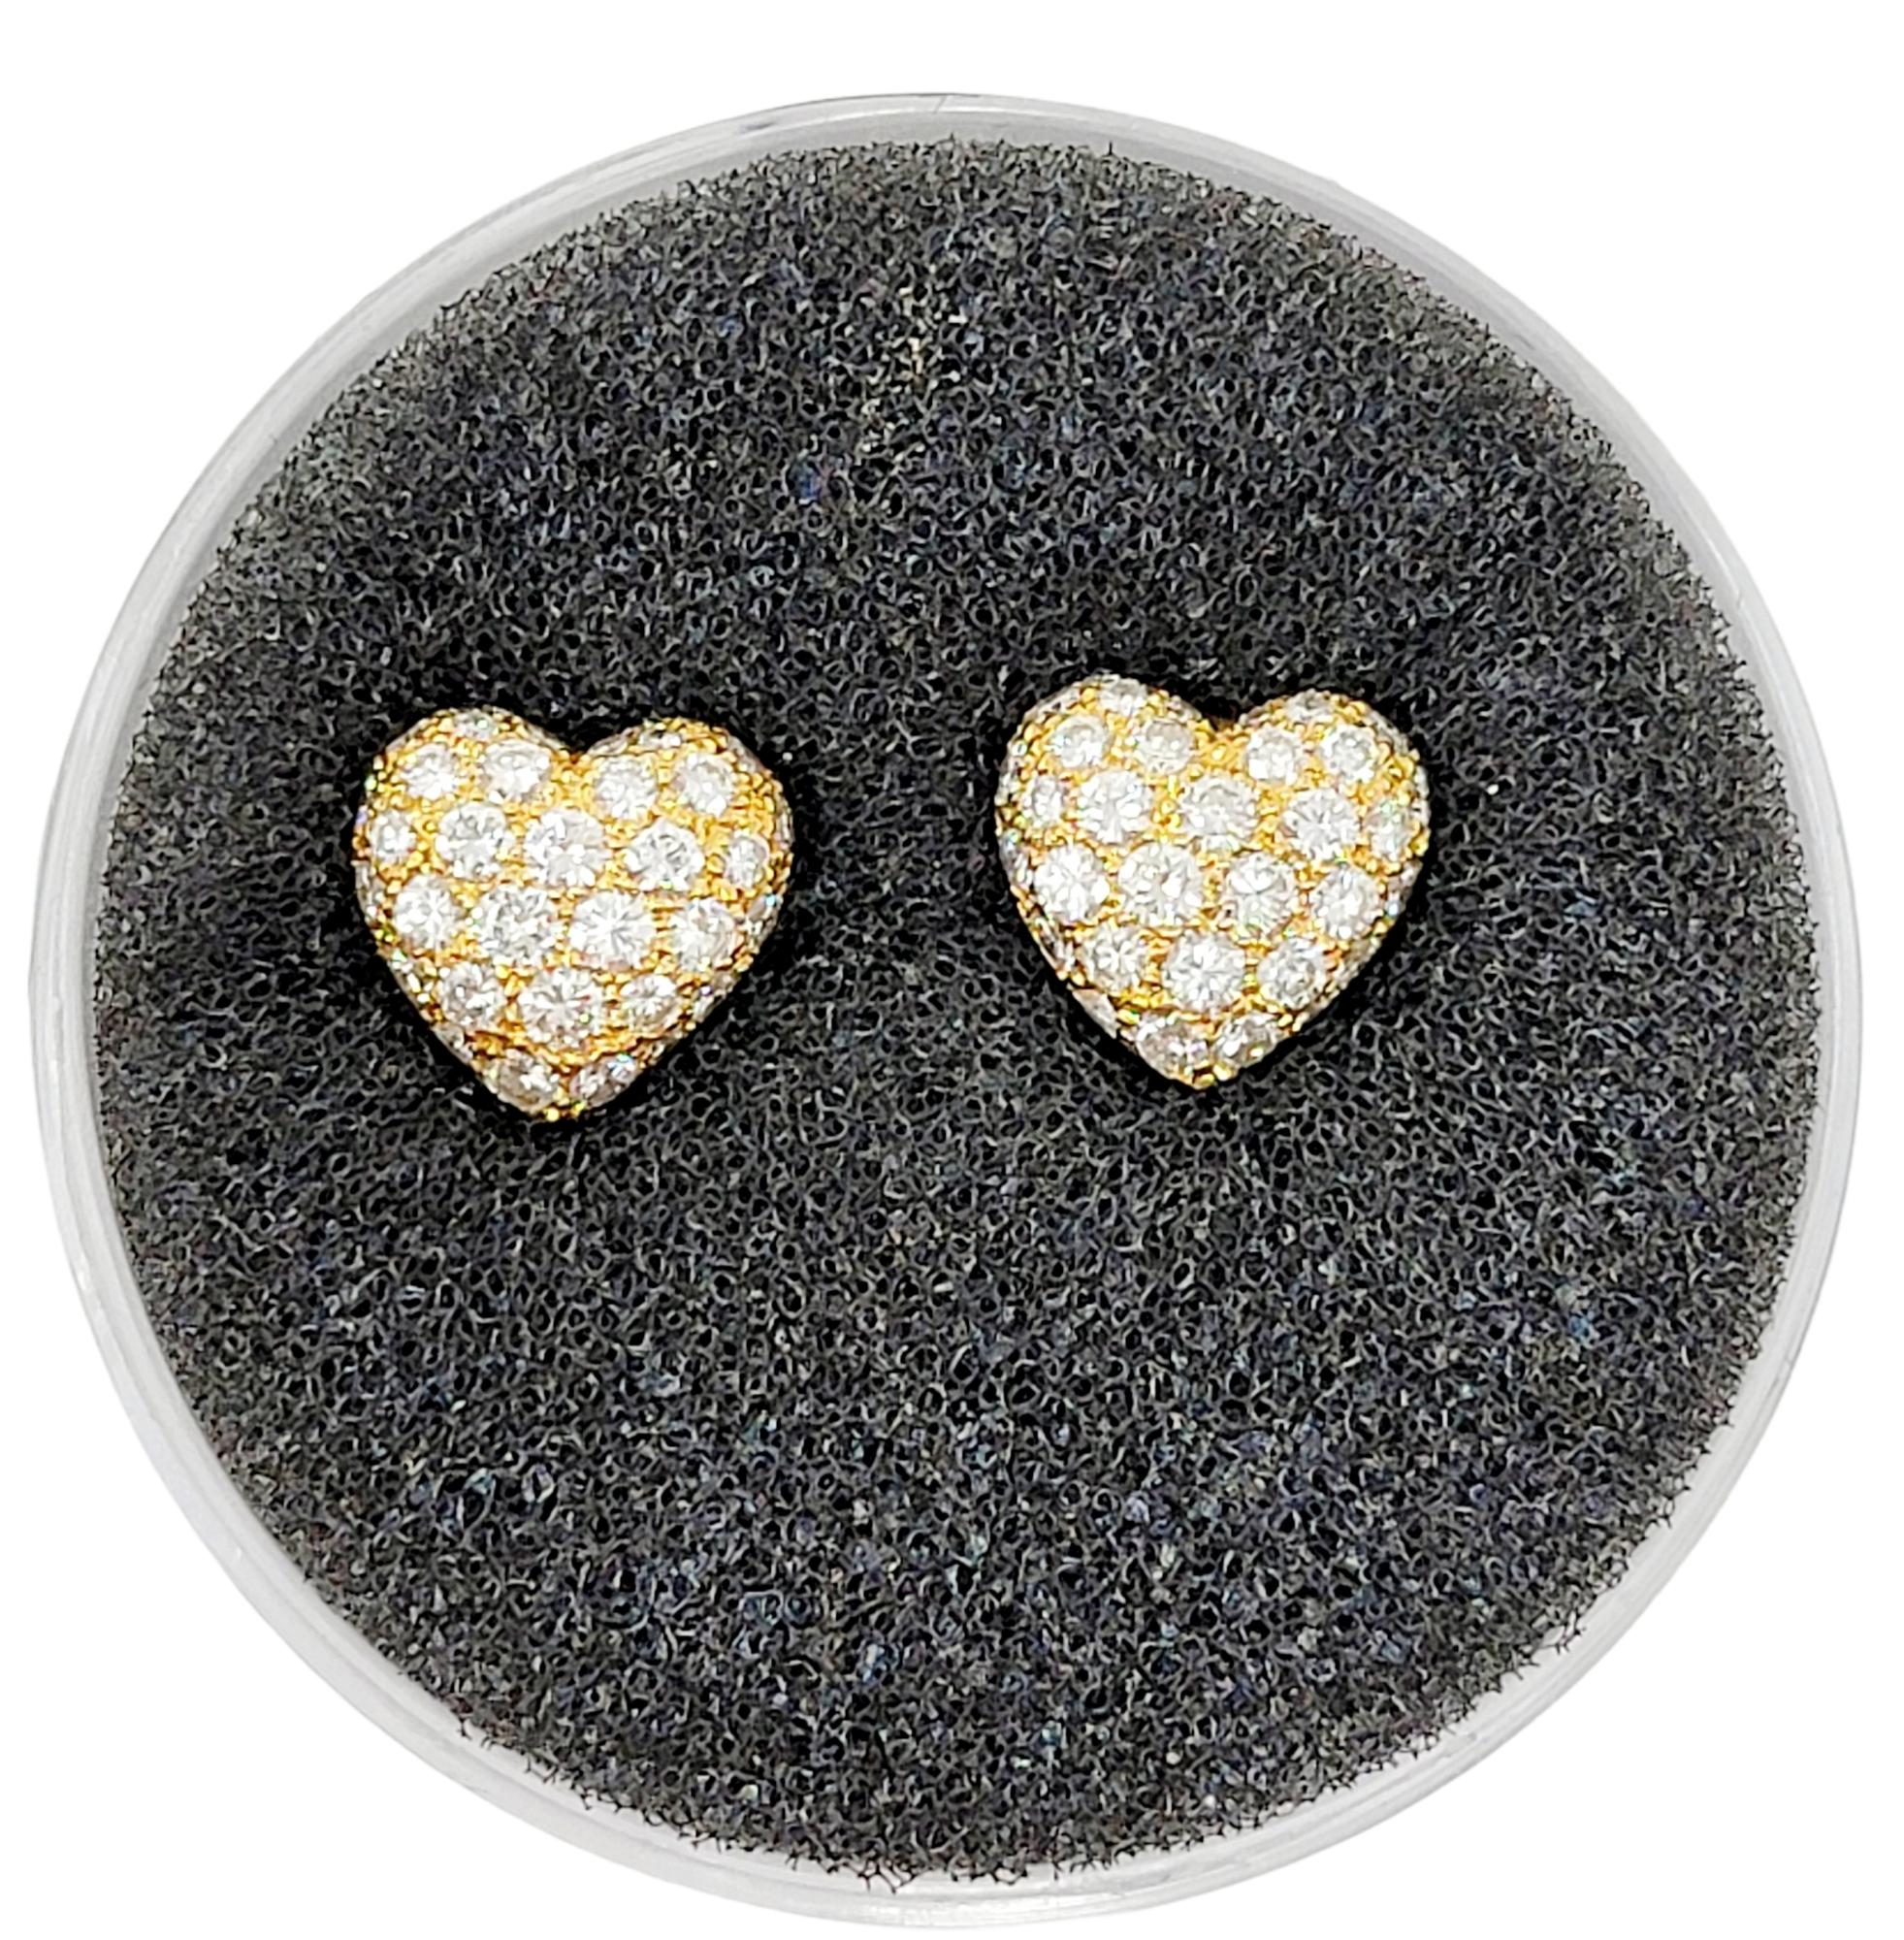 Contemporary Cartier 1.20 Carat Total Diamond Pave Heart Stud Earrings in 18 Karat Gold For Sale